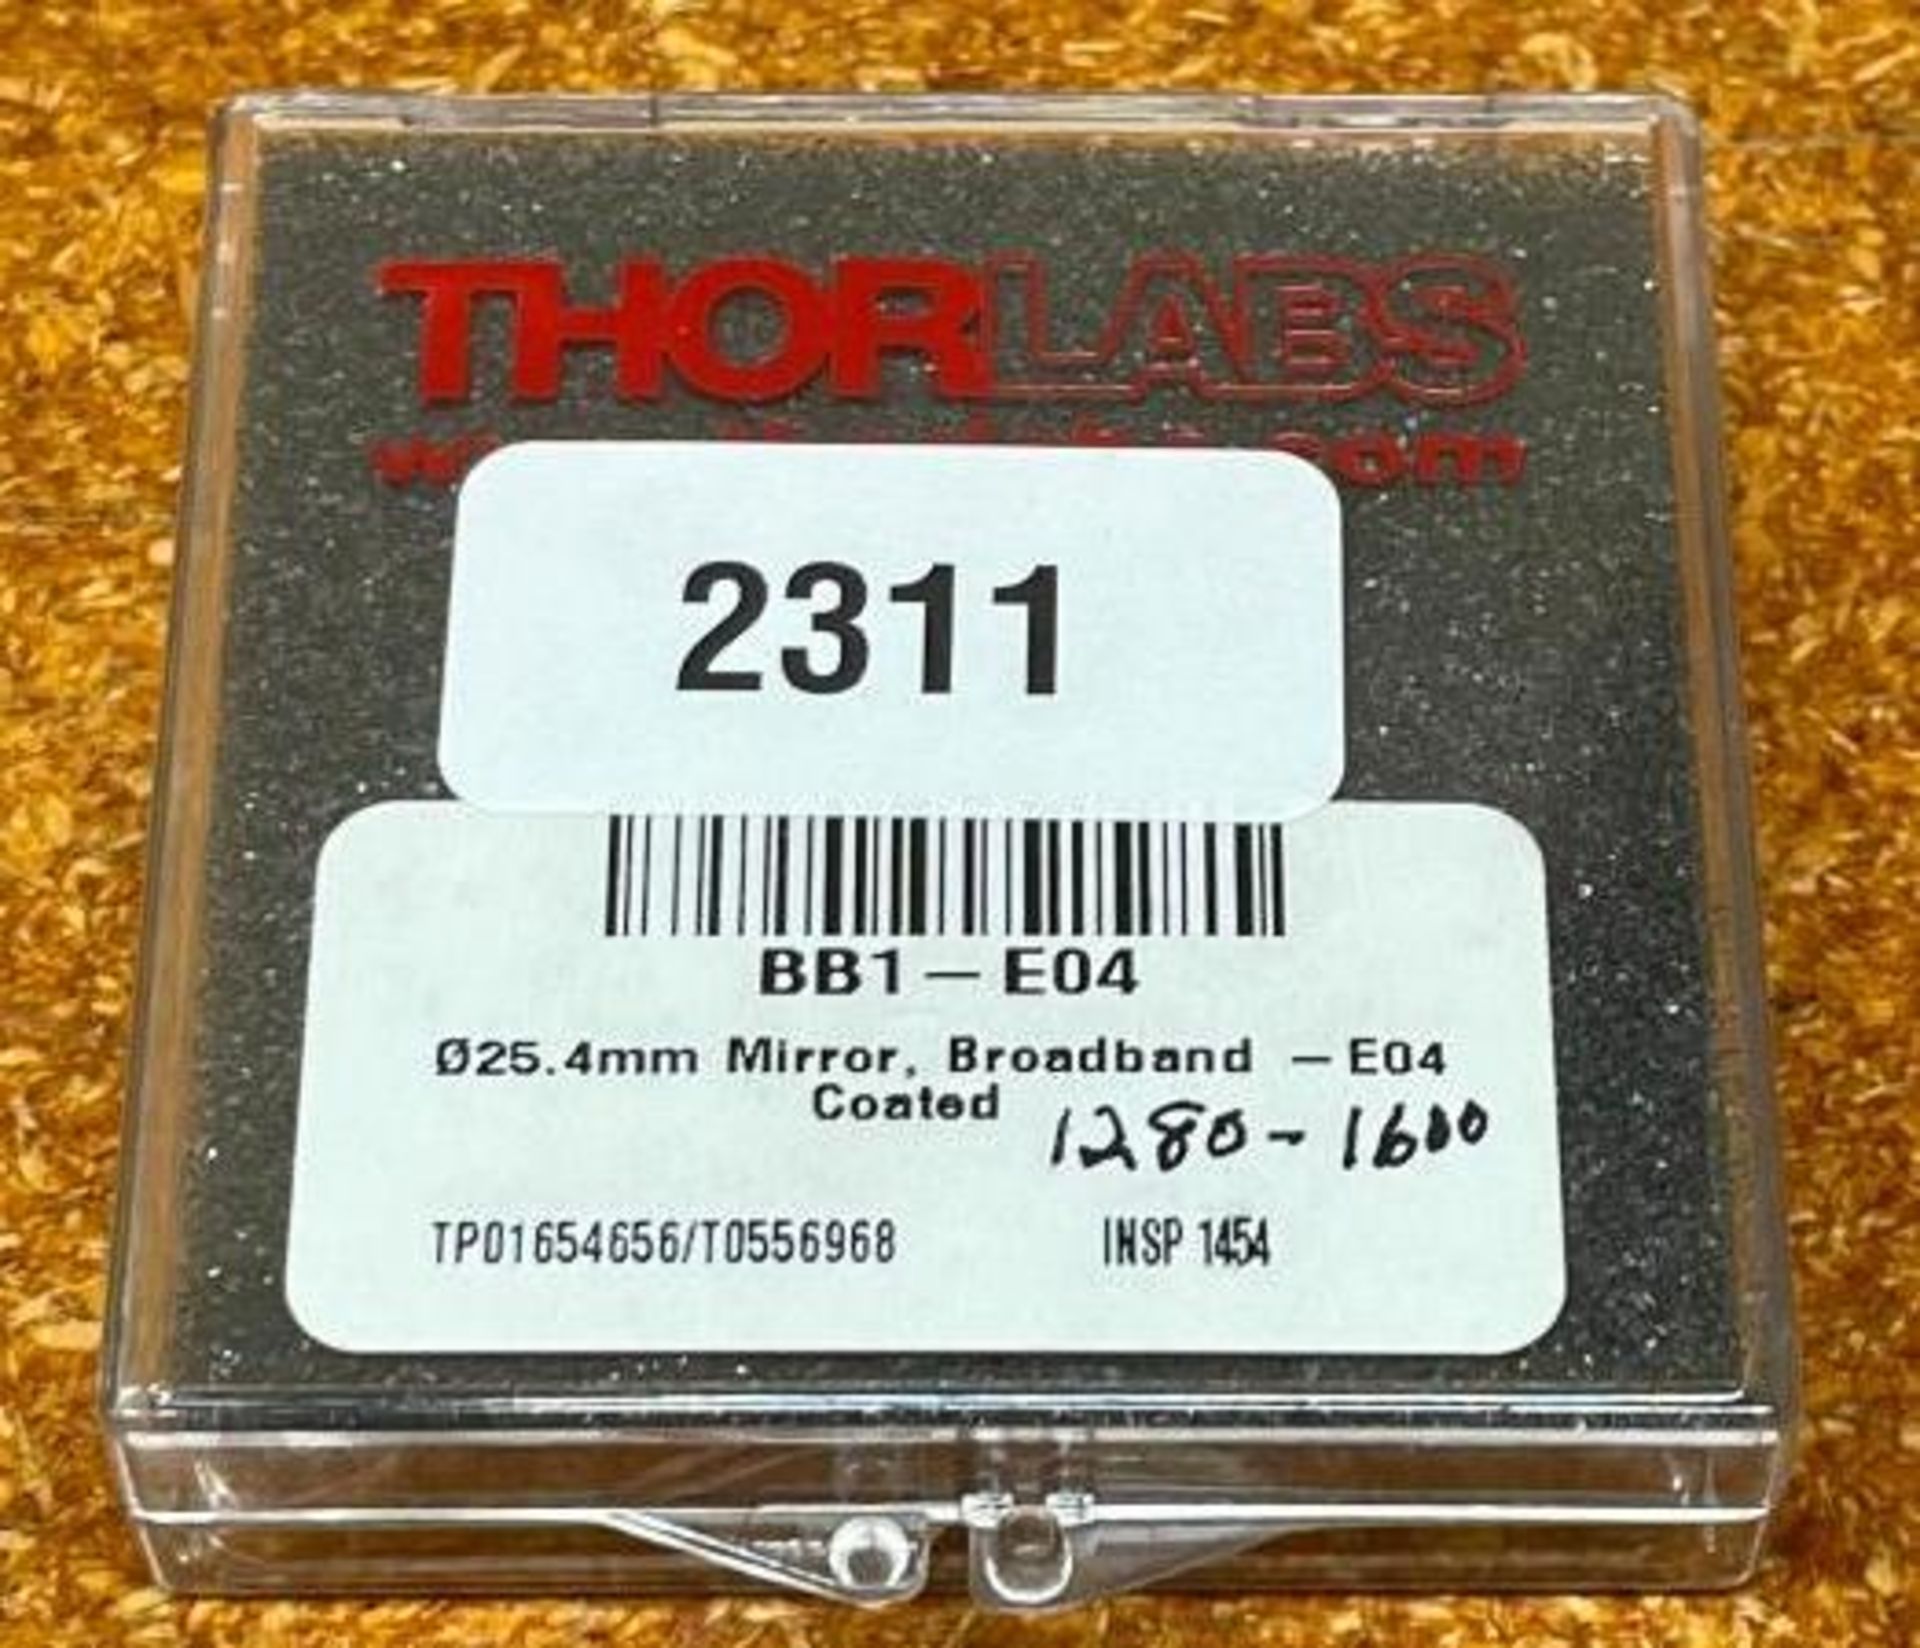 BROADBAND DIELECTRIC MIRROR BRAND/MODEL: THORLABS BB1-E04 INFORMATION: 1" DIAMETER, HR FOR 1280-1600 - Image 2 of 2